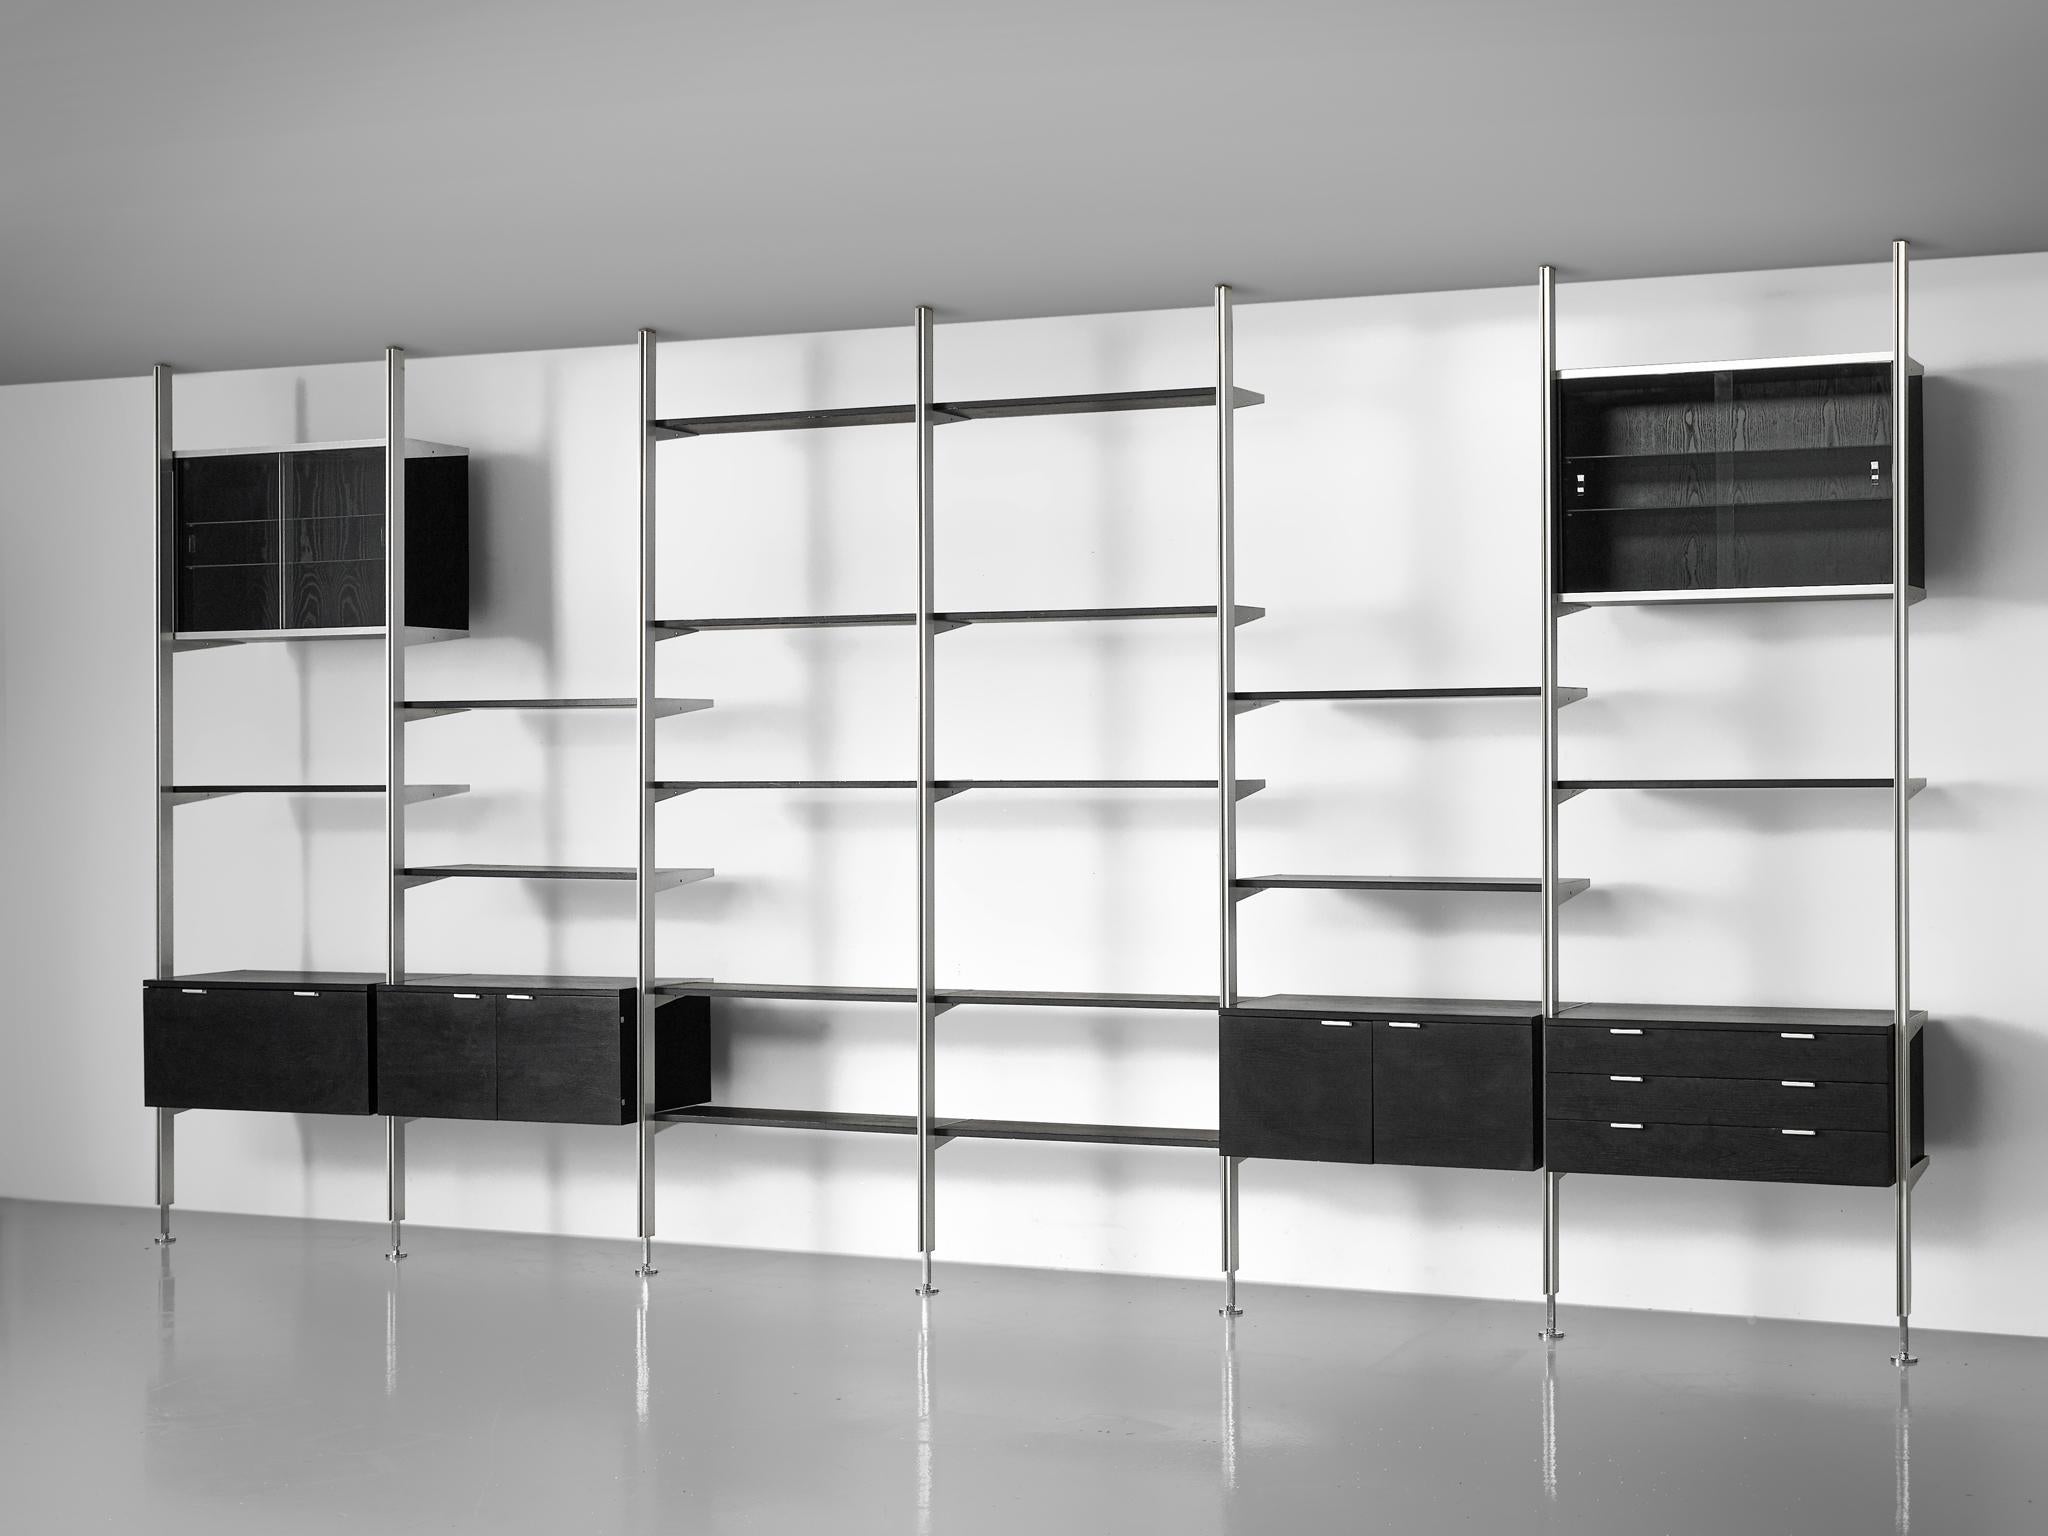 George Nelson, 'CSS' wall unit, brushed steel, glass and wood, United States, 1960s

This very large storage system is designed by Nelson in the 1960s. The wall unit was the first piece of furniture by Miller that made use of vertical space to